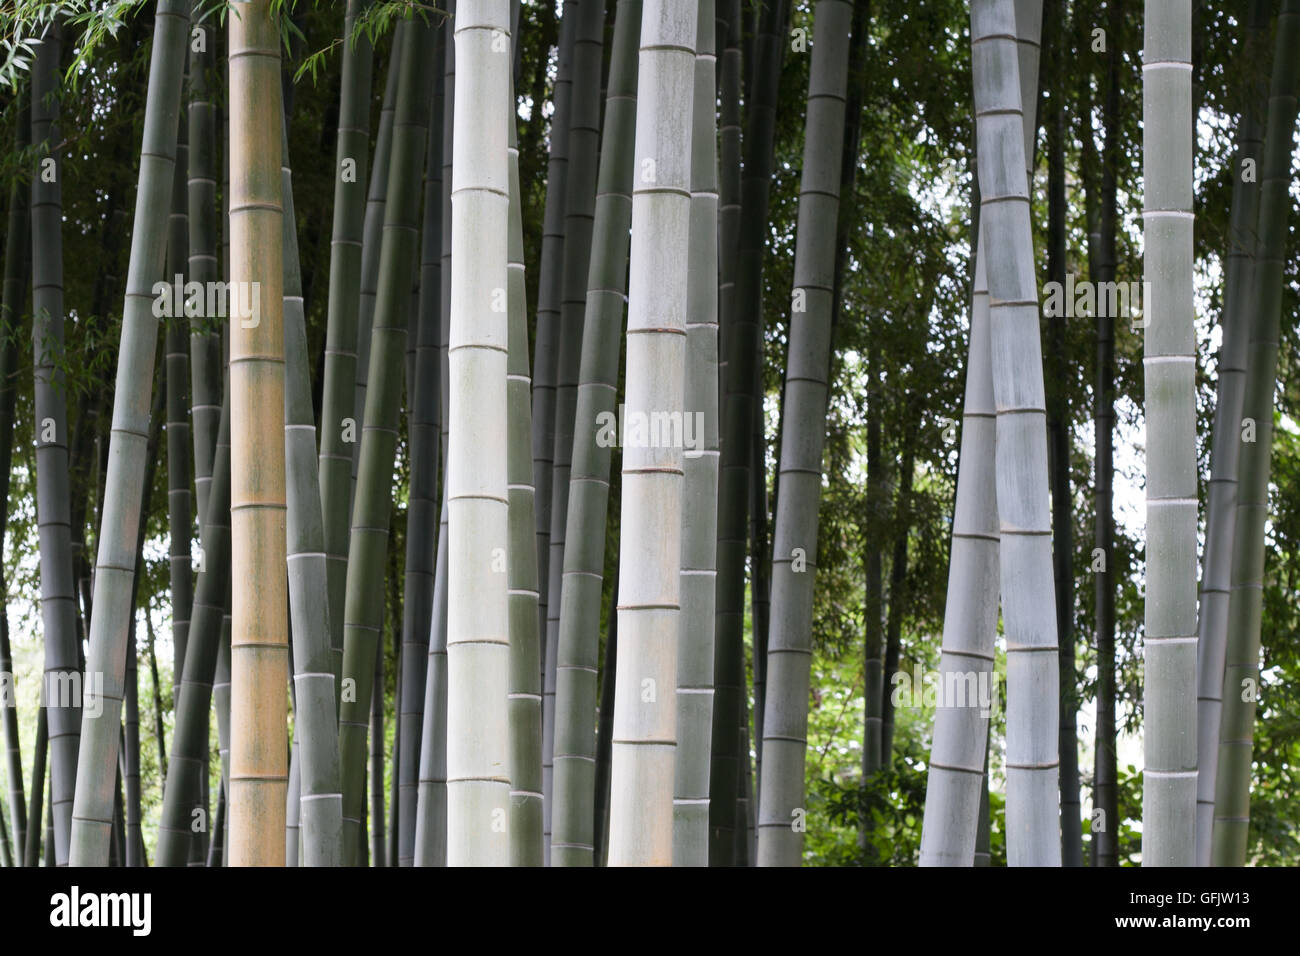 Bamboo forest in Japan Stock Photo - Alamy